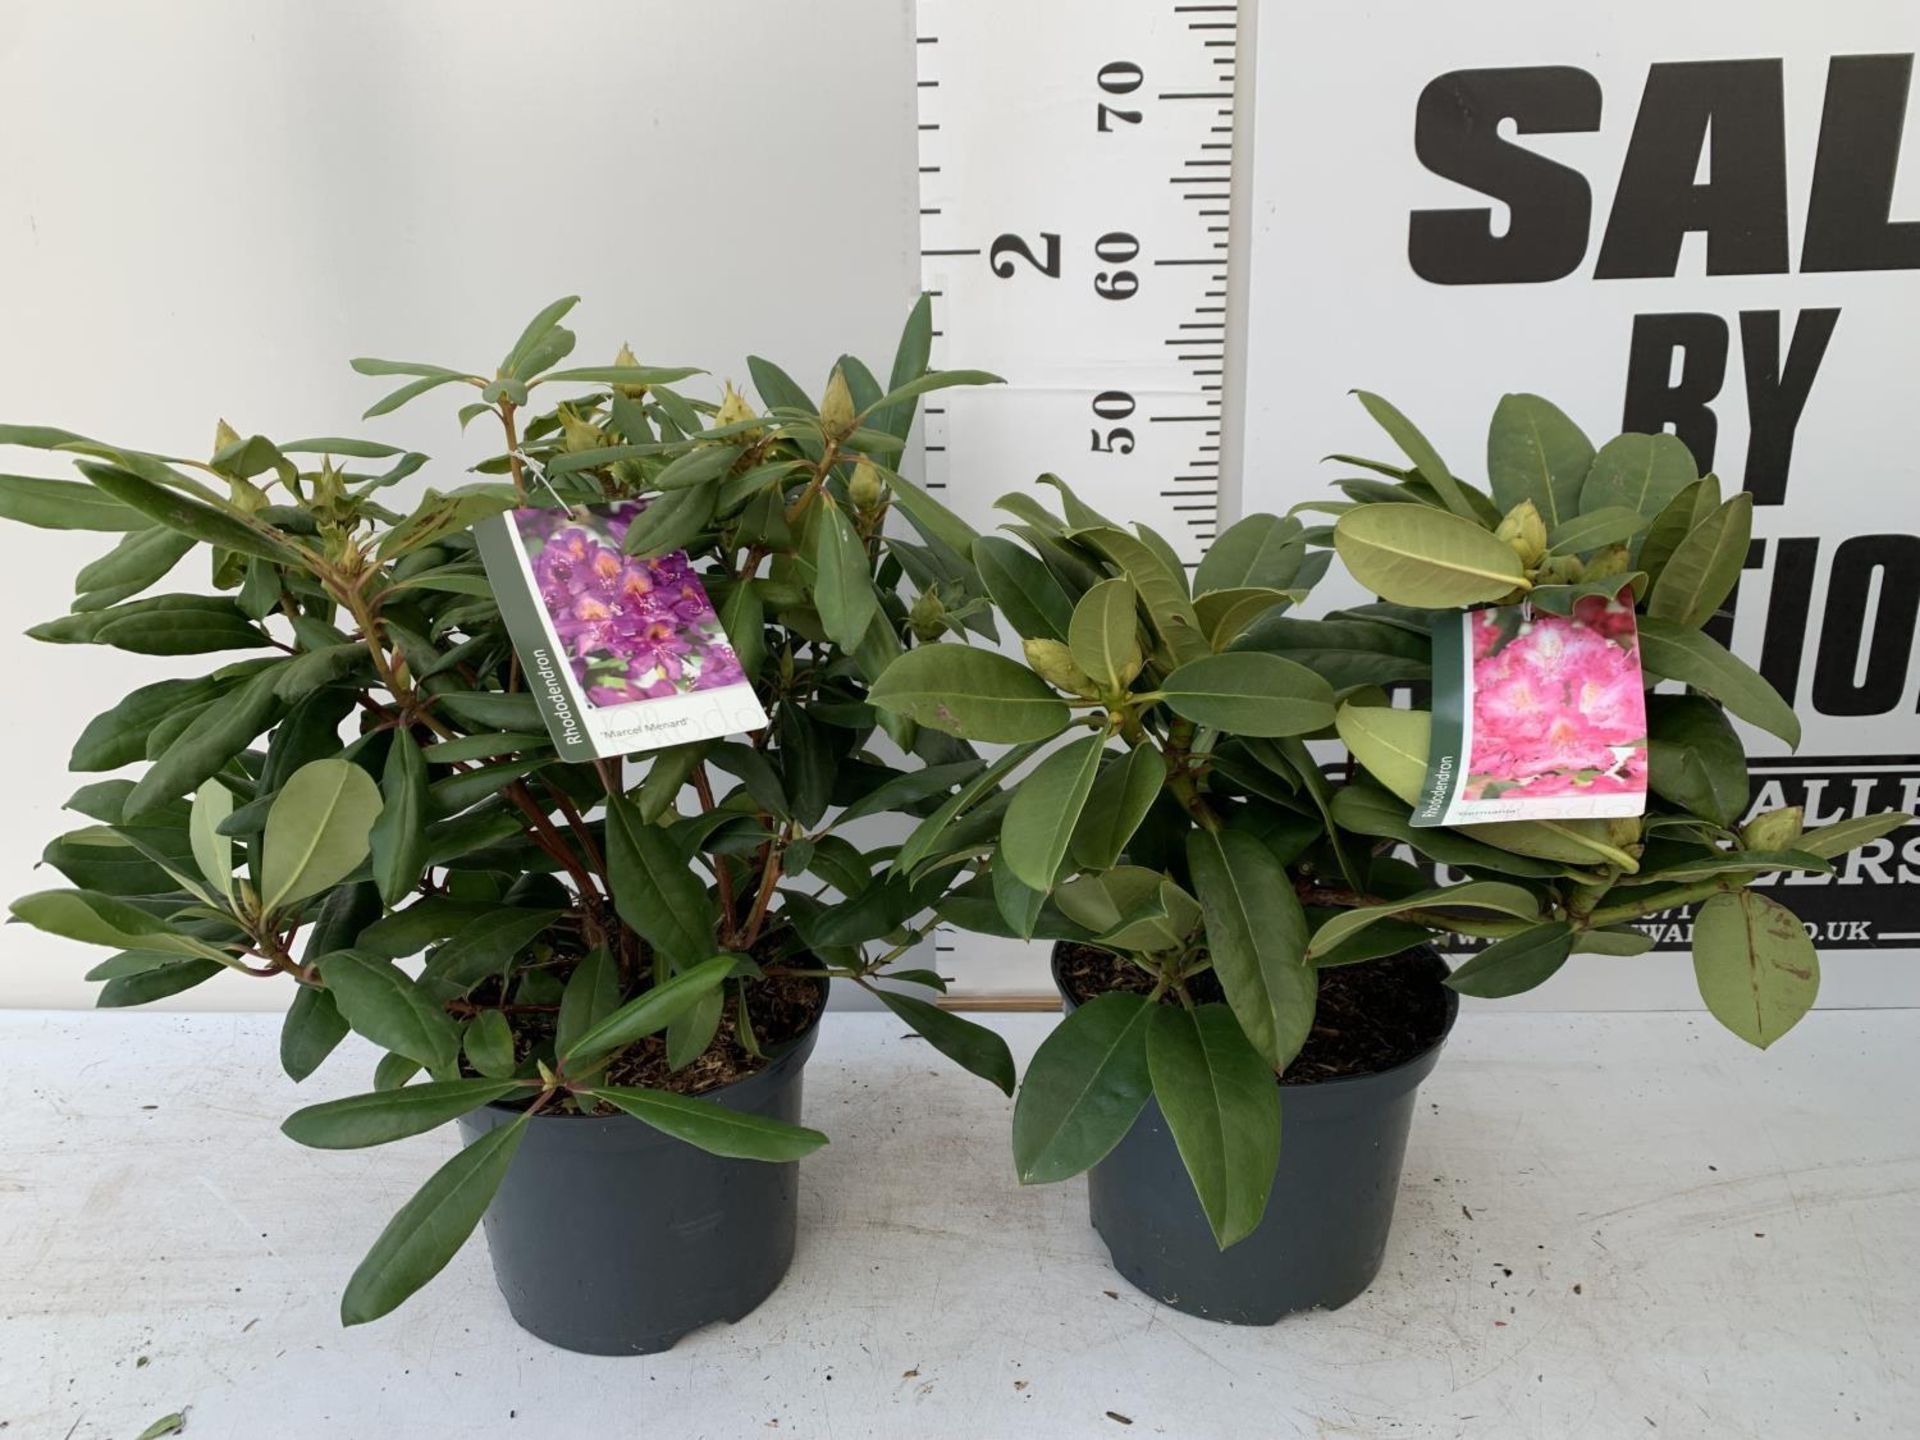 TWO RHODODENDRON MARCEL MENARD AND GERMANIA IN 5 LTR POTS 60CM TALL PLUS VAT TO BE SOLD FOR THE TWO - Image 2 of 10